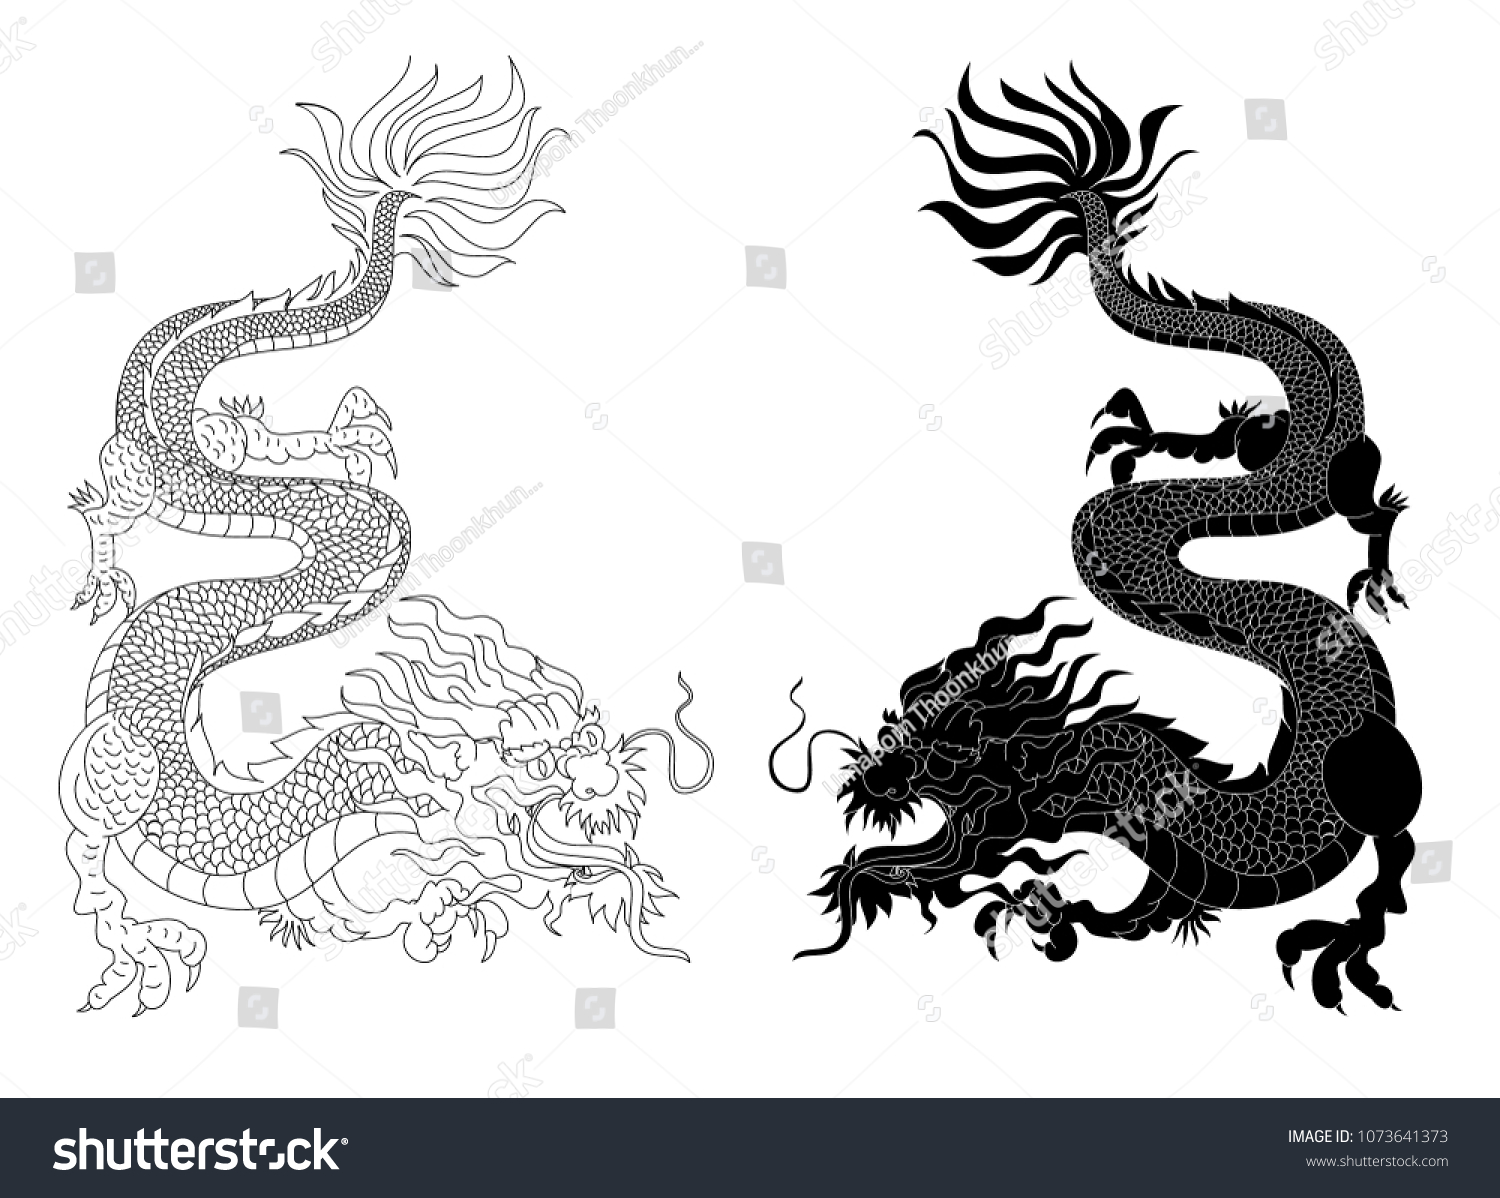 Outline Chinese Dragon Illustration Tattoo Designjapanese Stock Vector Royalty Free 1073641373